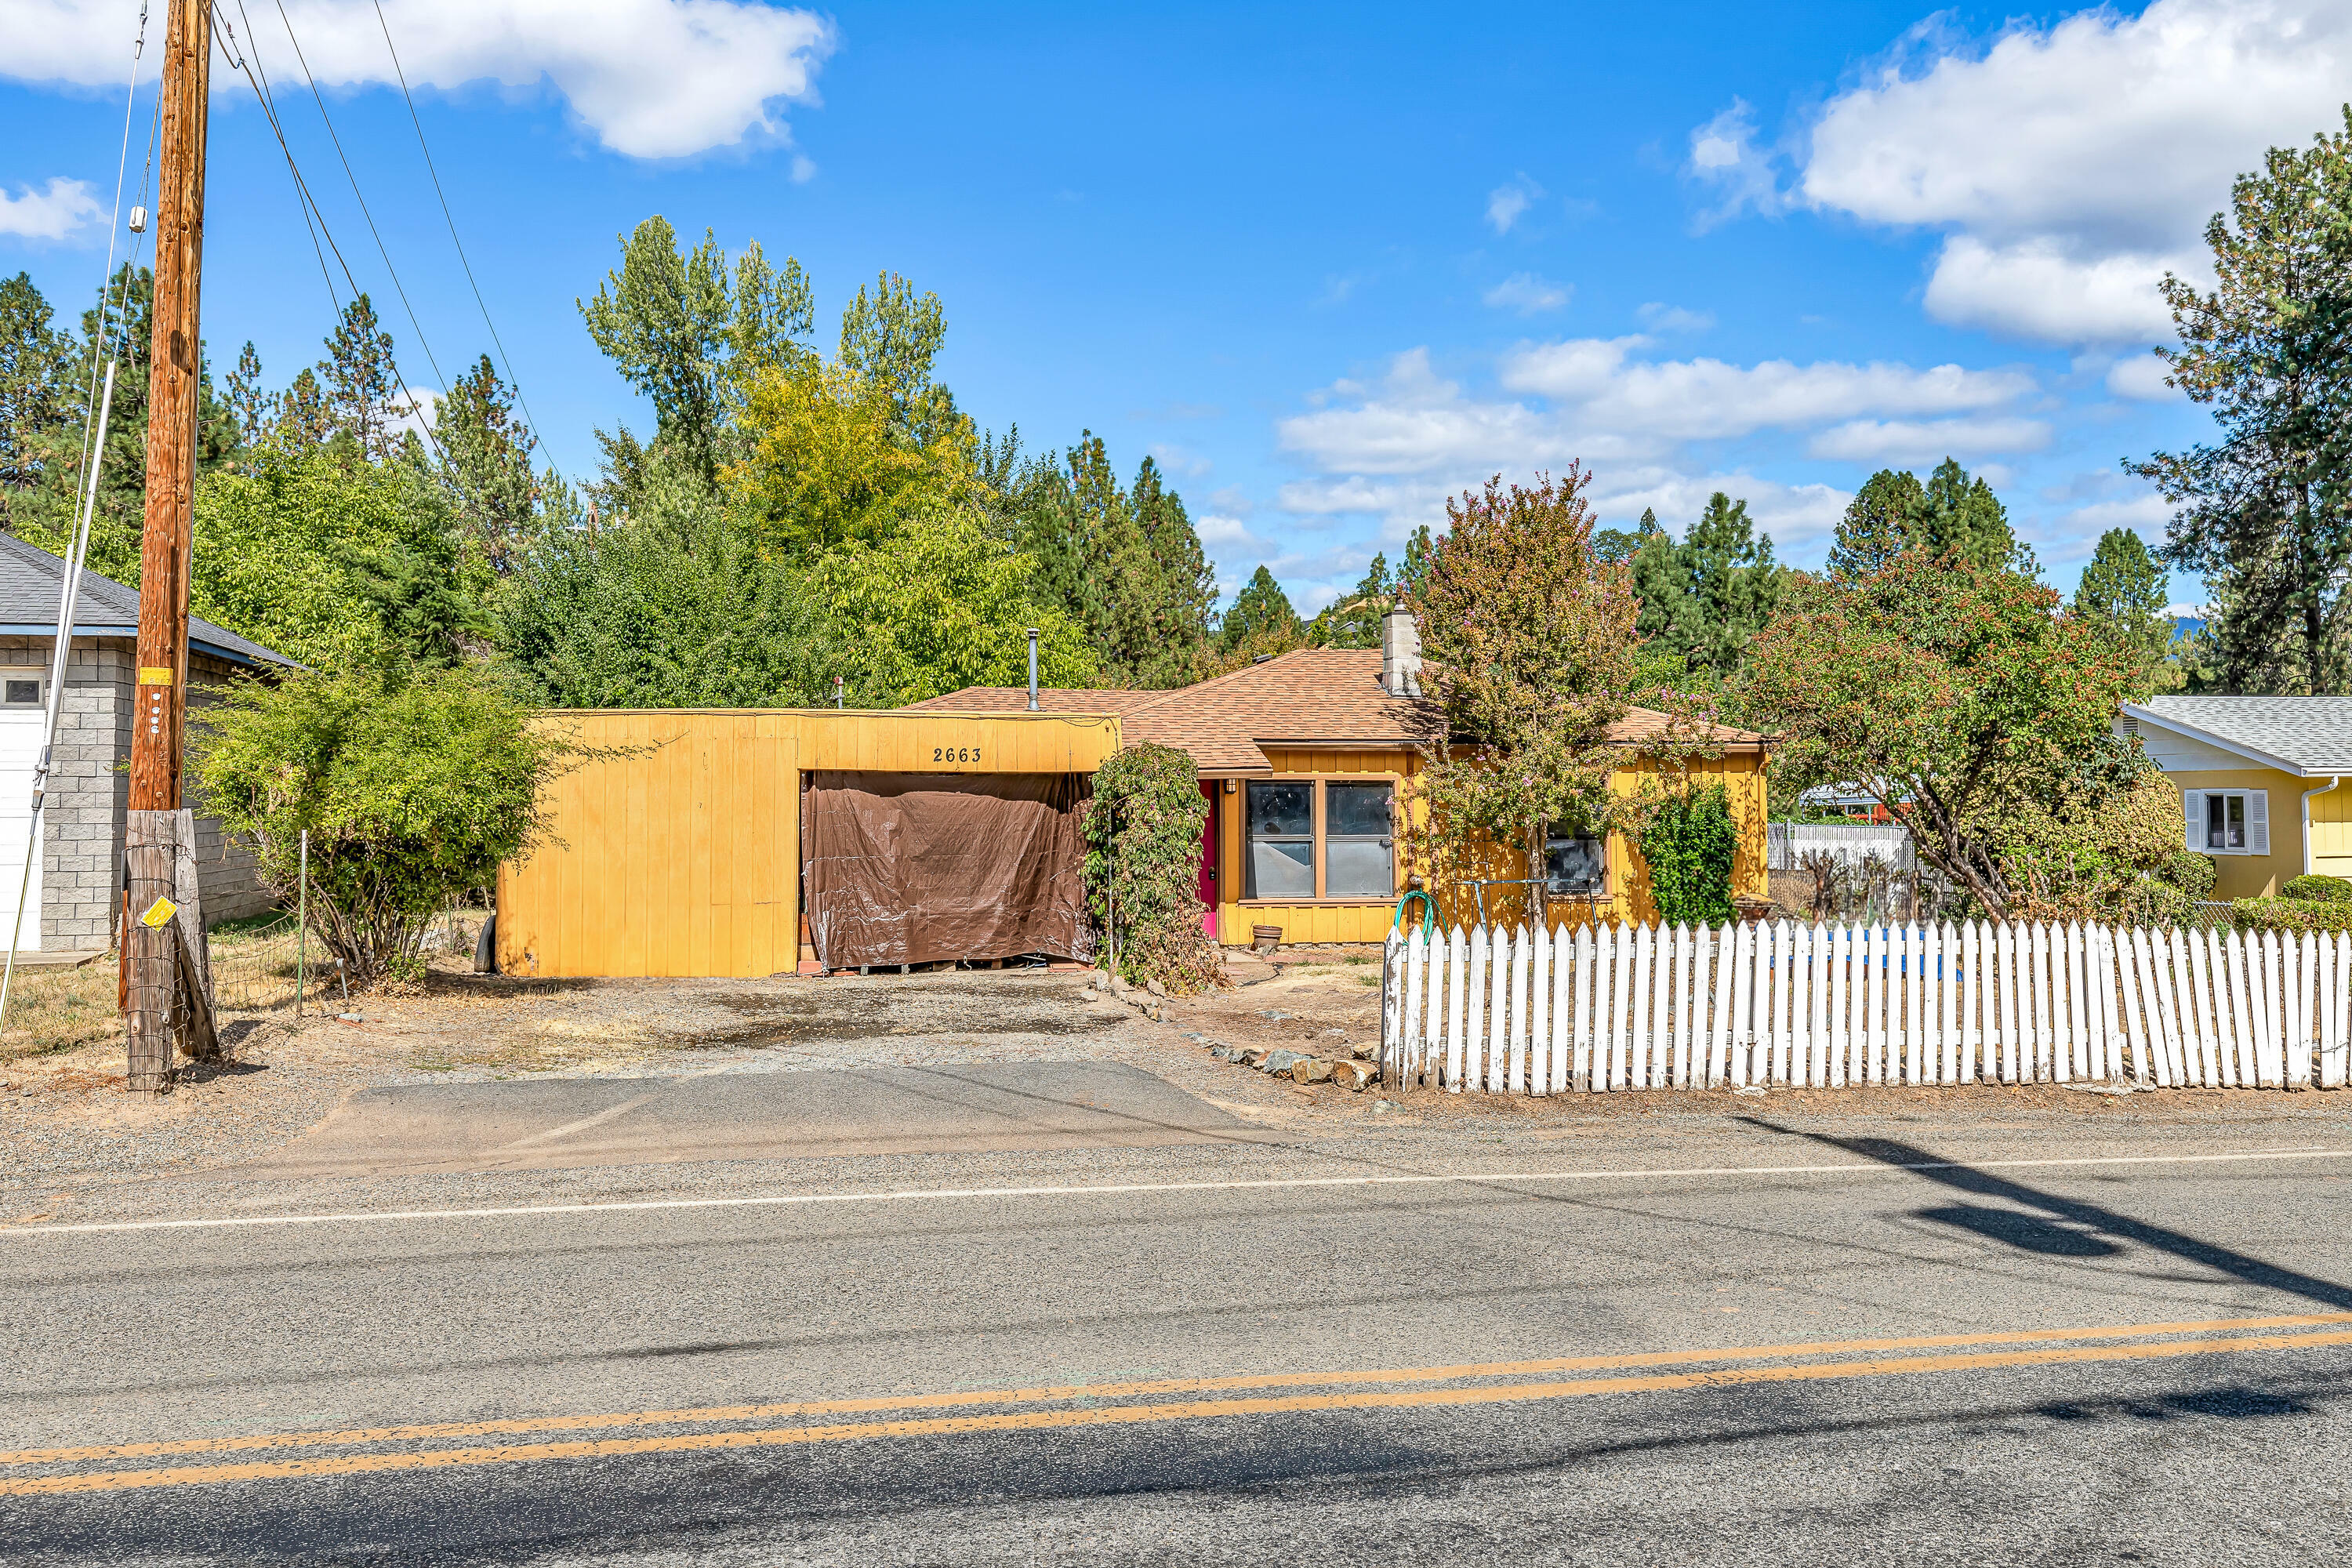 2663 Cloverlawn Drive  Grants Pass OR 97527 photo